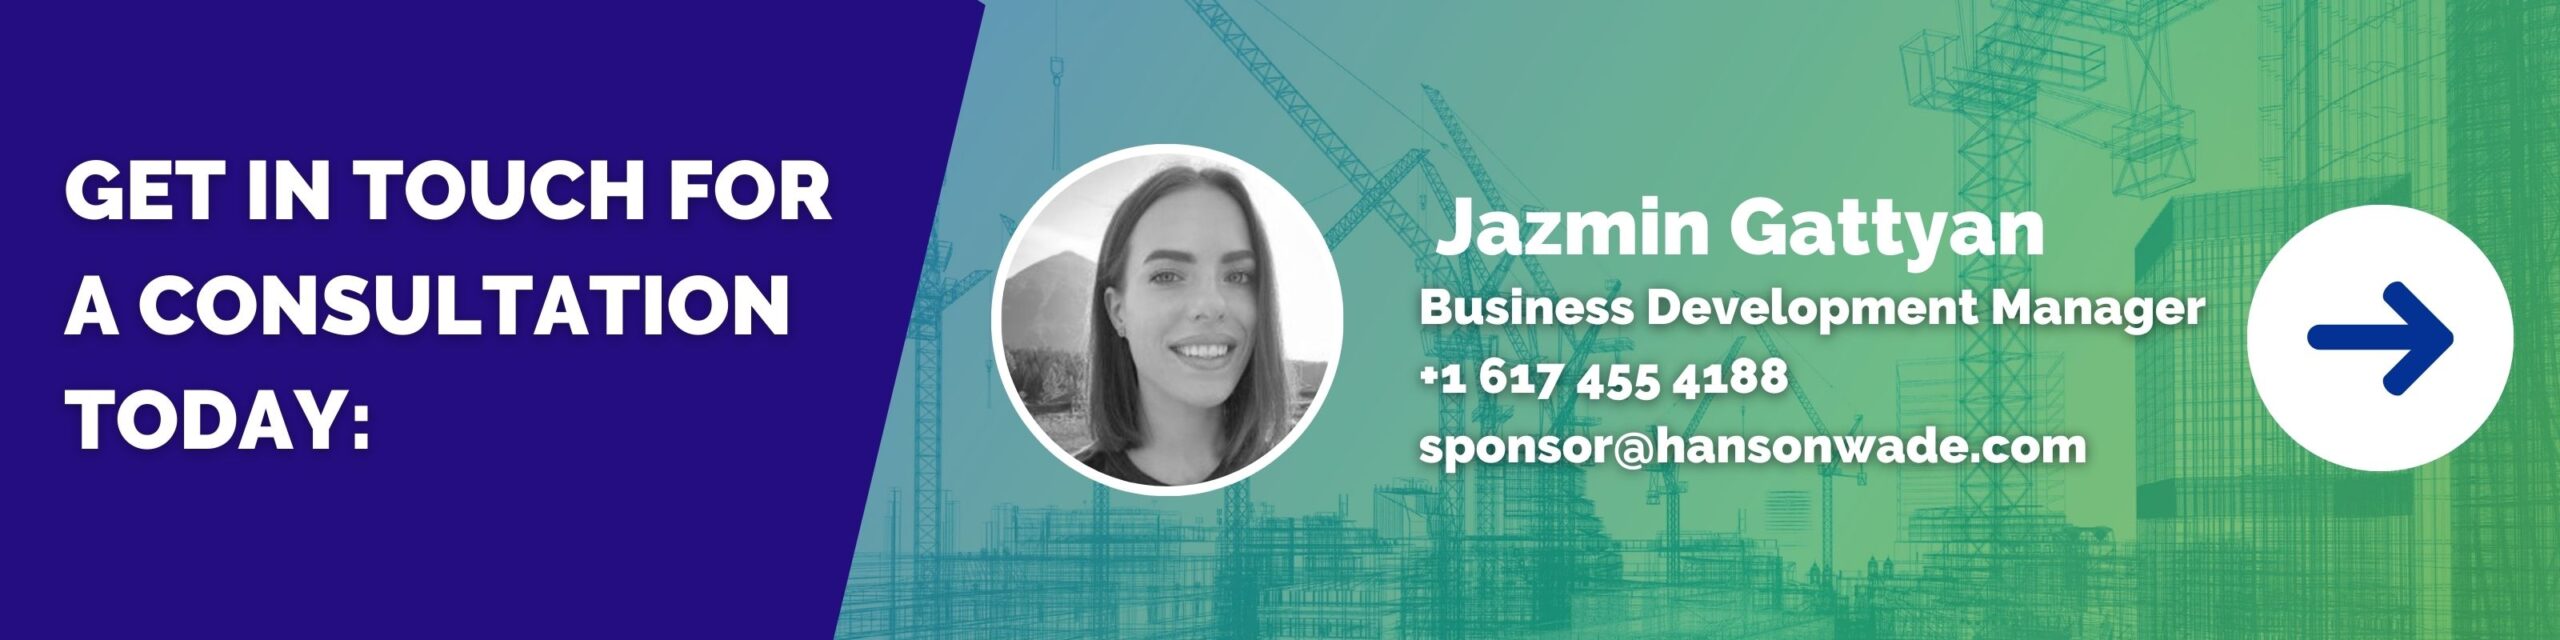 Get in touch with Jazmin for partnership opportunities